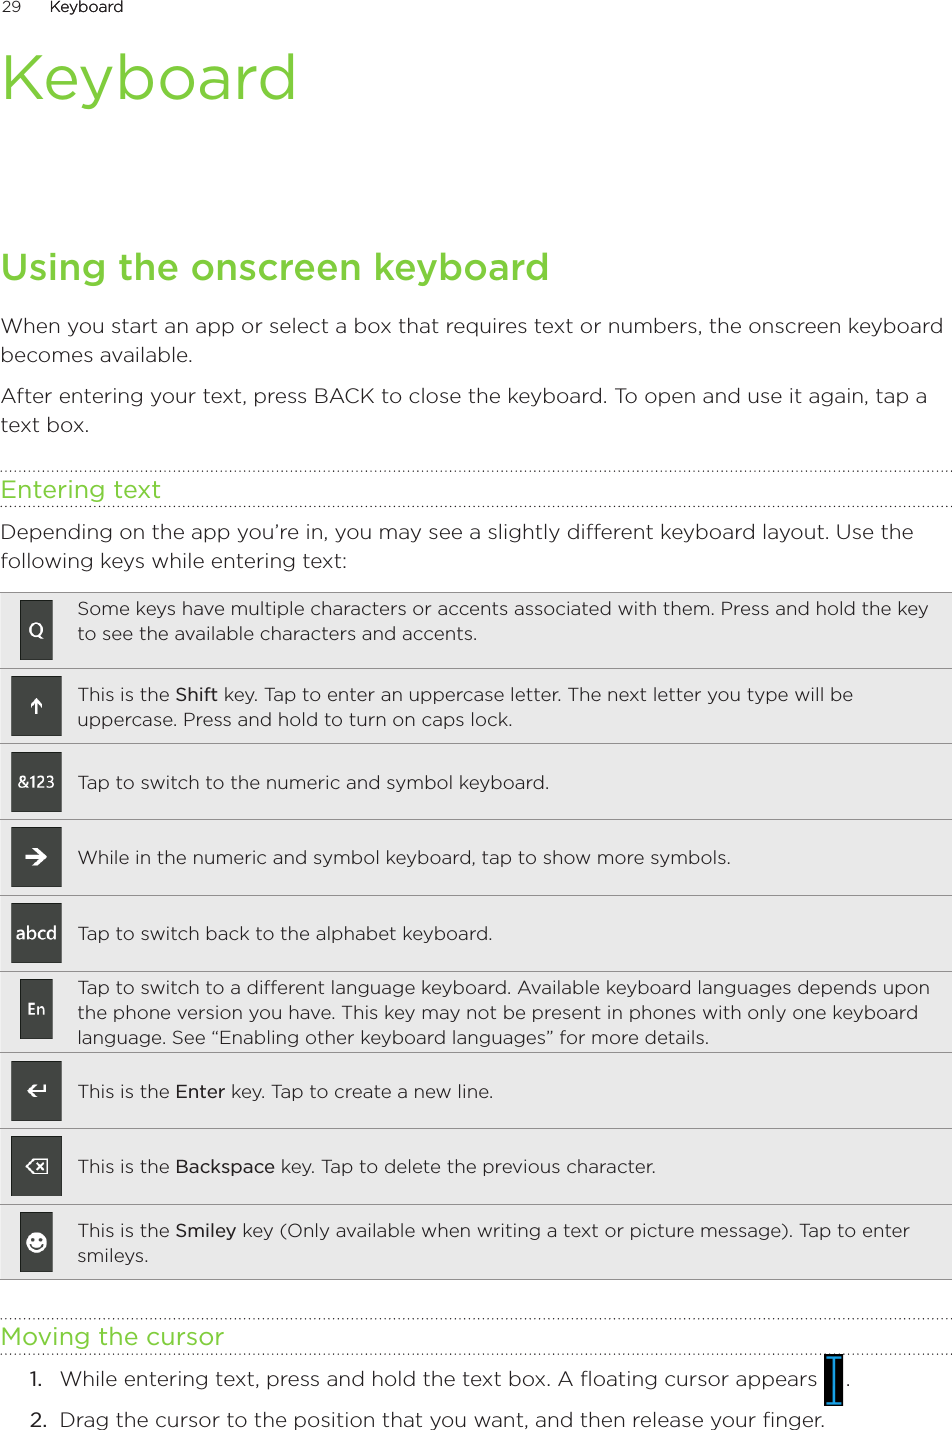 29      KeyboardKeyboard      KeyboardUsing the onscreen keyboardWhen you start an app or select a box that requires text or numbers, the onscreen keyboard becomes available.After entering your text, press BACK to close the keyboard. To open and use it again, tap a text box.Entering textDepending on the app you’re in, you may see a slightly different keyboard layout. Use the following keys while entering text:Some keys have multiple characters or accents associated with them. Press and hold the key to see the available characters and accents.This is the Shift key. Tap to enter an uppercase letter. The next letter you type will be uppercase. Press and hold to turn on caps lock. Tap to switch to the numeric and symbol keyboard.While in the numeric and symbol keyboard, tap to show more symbols.Tap to switch back to the alphabet keyboard.Tap to switch to a different language keyboard. Available keyboard languages depends upon the phone version you have. This key may not be present in phones with only one keyboard language. See “Enabling other keyboard languages” for more details.This is the Enter key. Tap to create a new line.This is the Backspace key. Tap to delete the previous character.This is the Smiley key (Only available when writing a text or picture message). Tap to enter smileys.Moving the cursorWhile entering text, press and hold the text box. A floating cursor appears   .Drag the cursor to the position that you want, and then release your finger. 1.2.